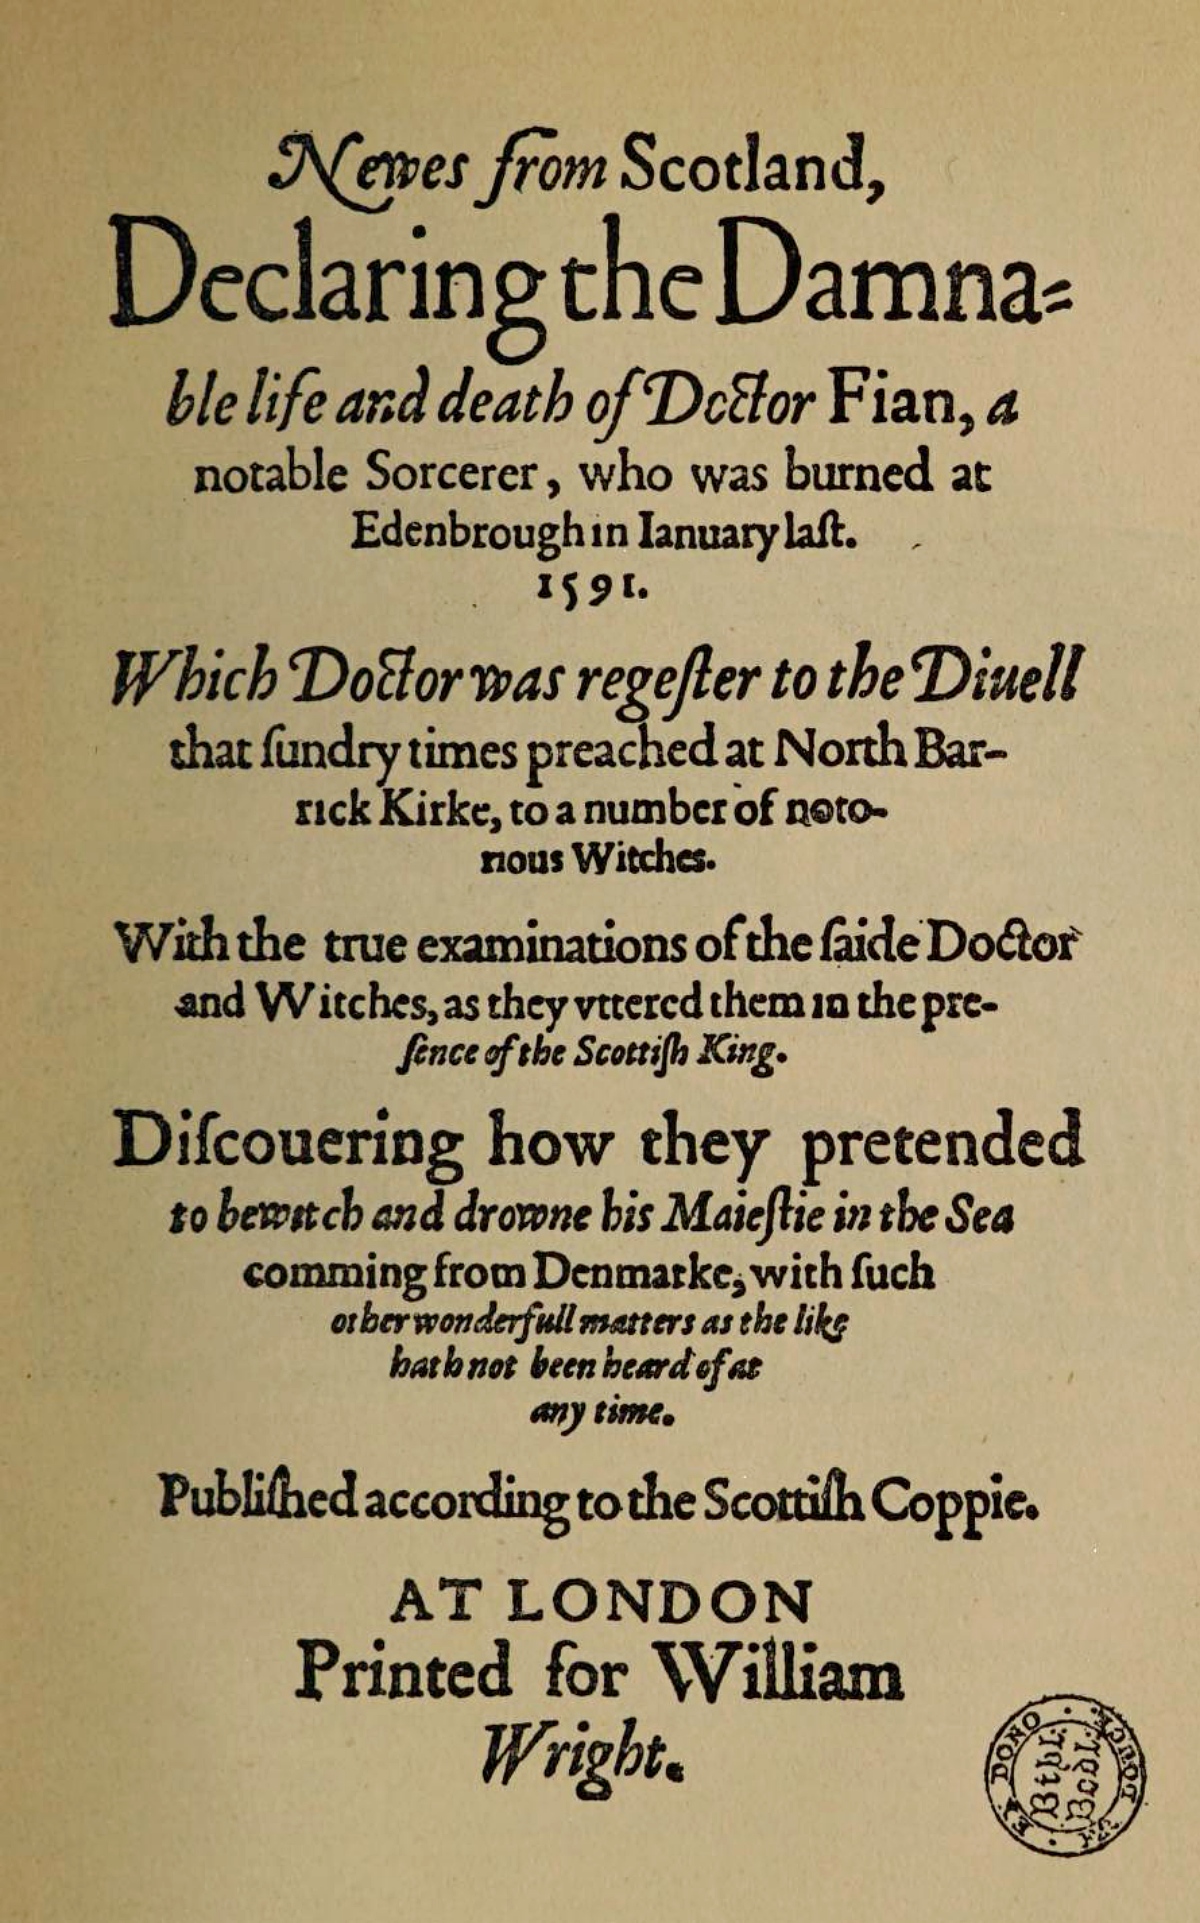 death announcement for doctor accused of witchcraft in Scotland in the 1500s